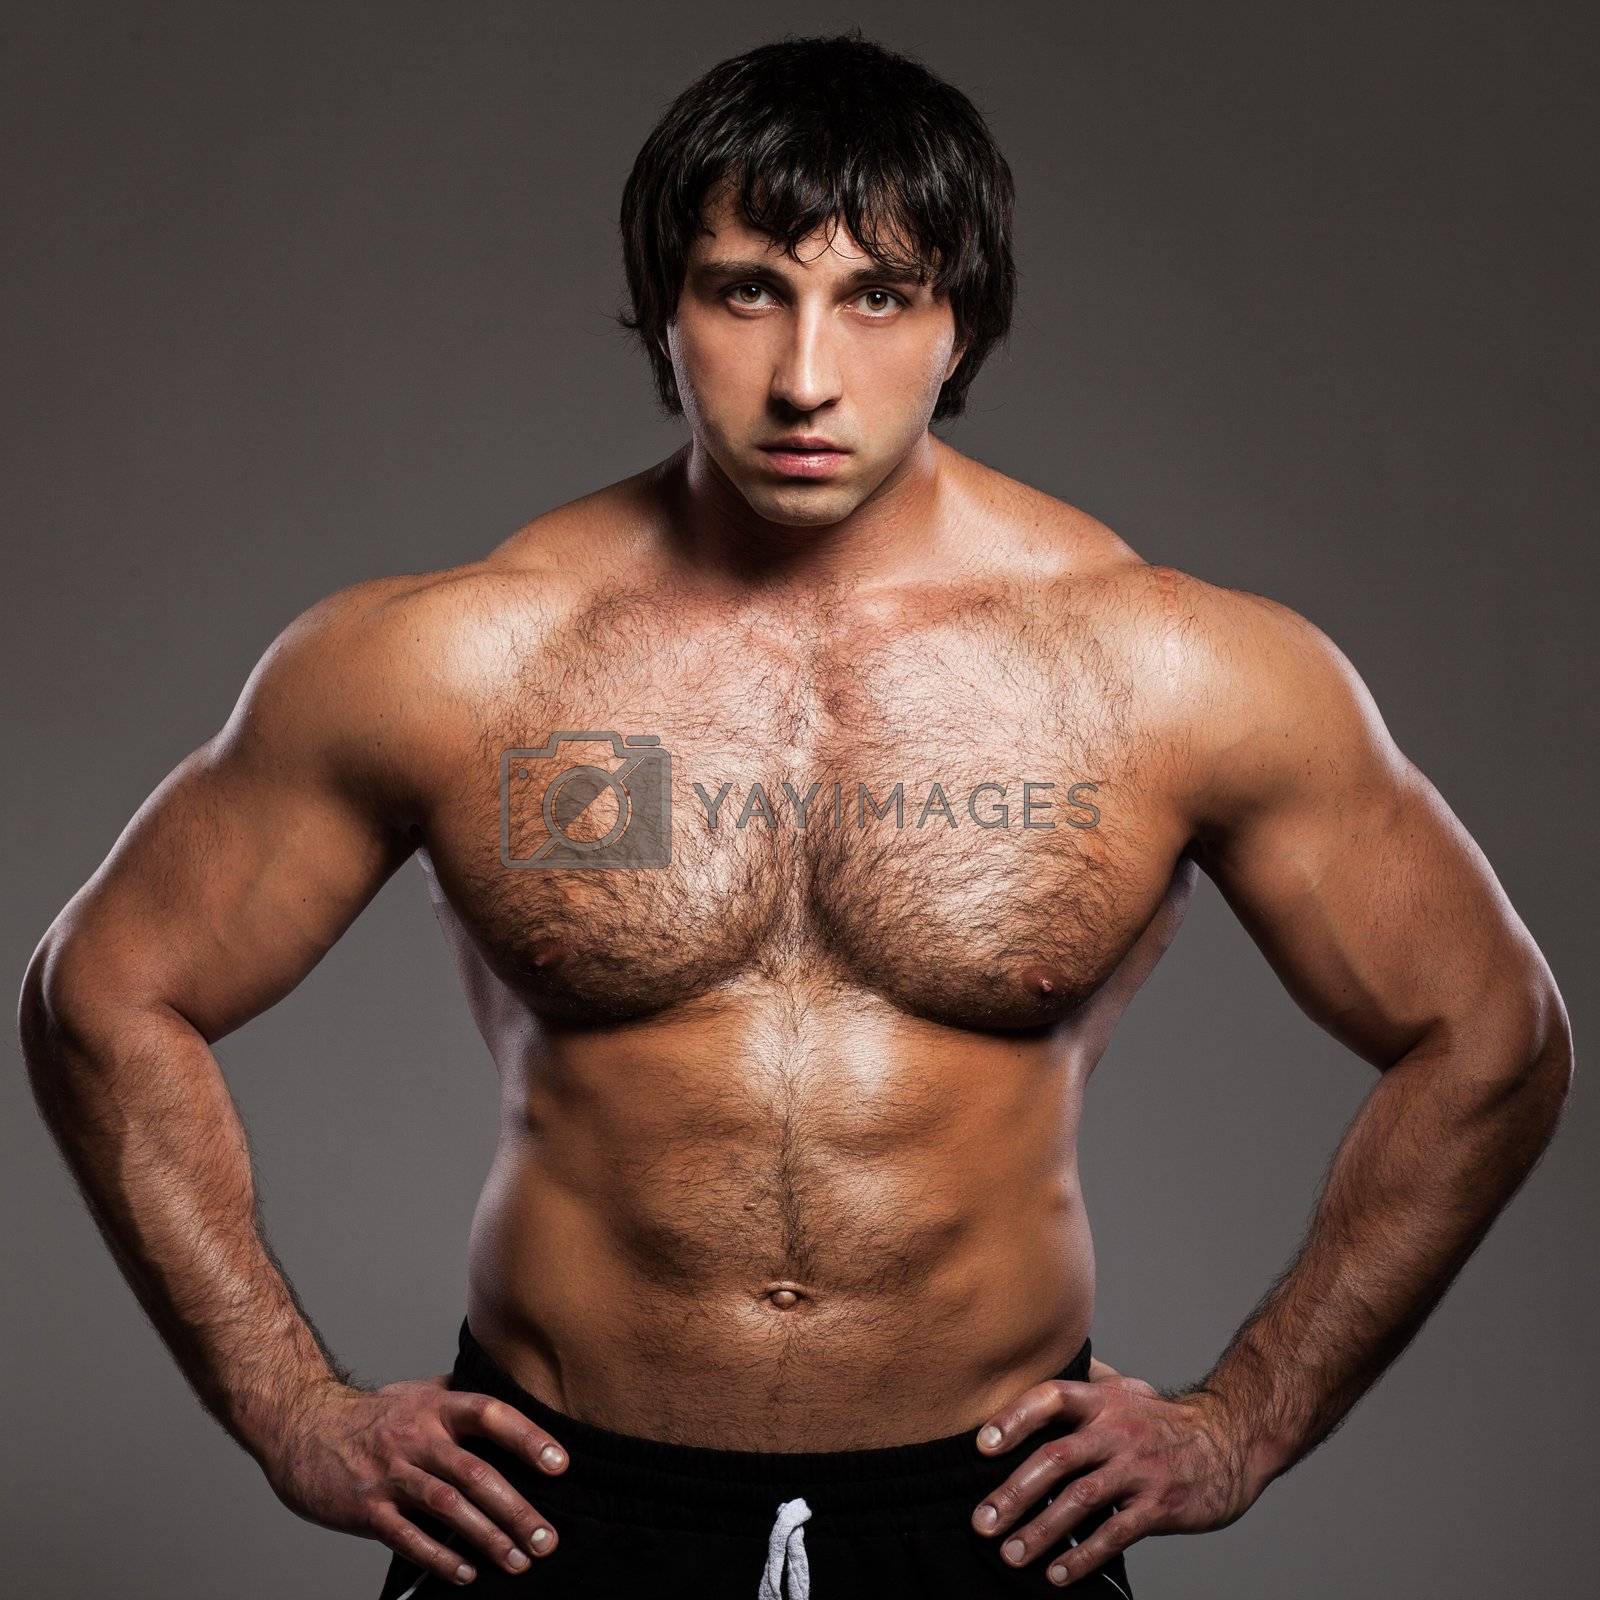 Bodybuilder with naked torso Stock photo and royalty 